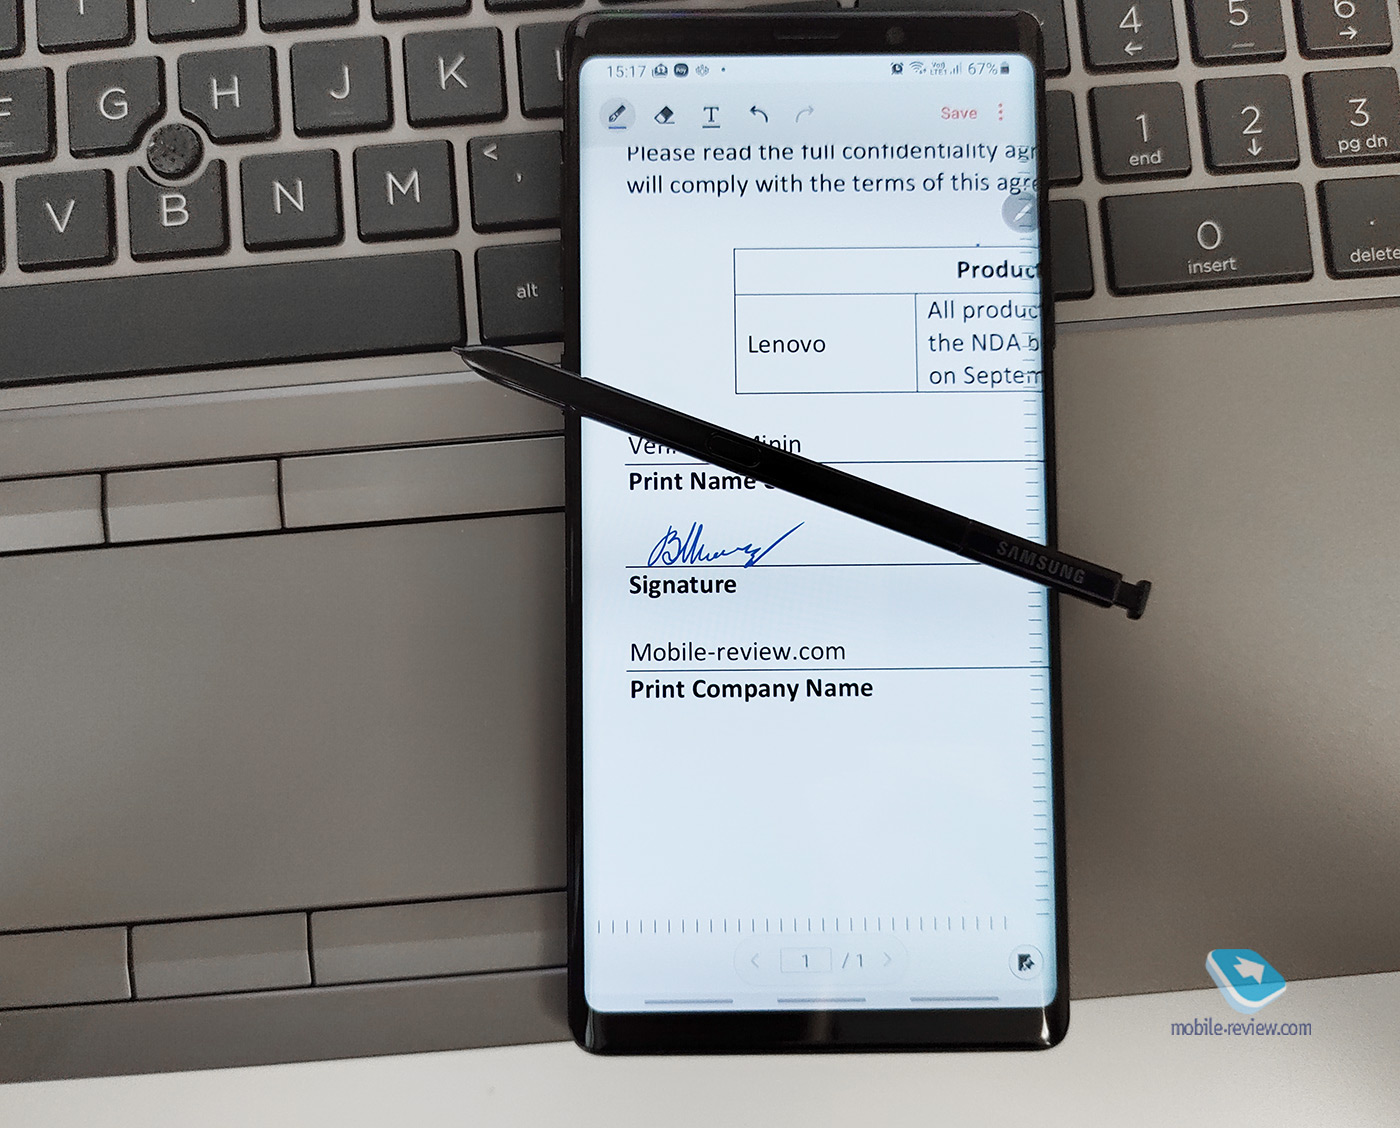 # Echo94: my experience of operating Samsung Galaxy Note 9